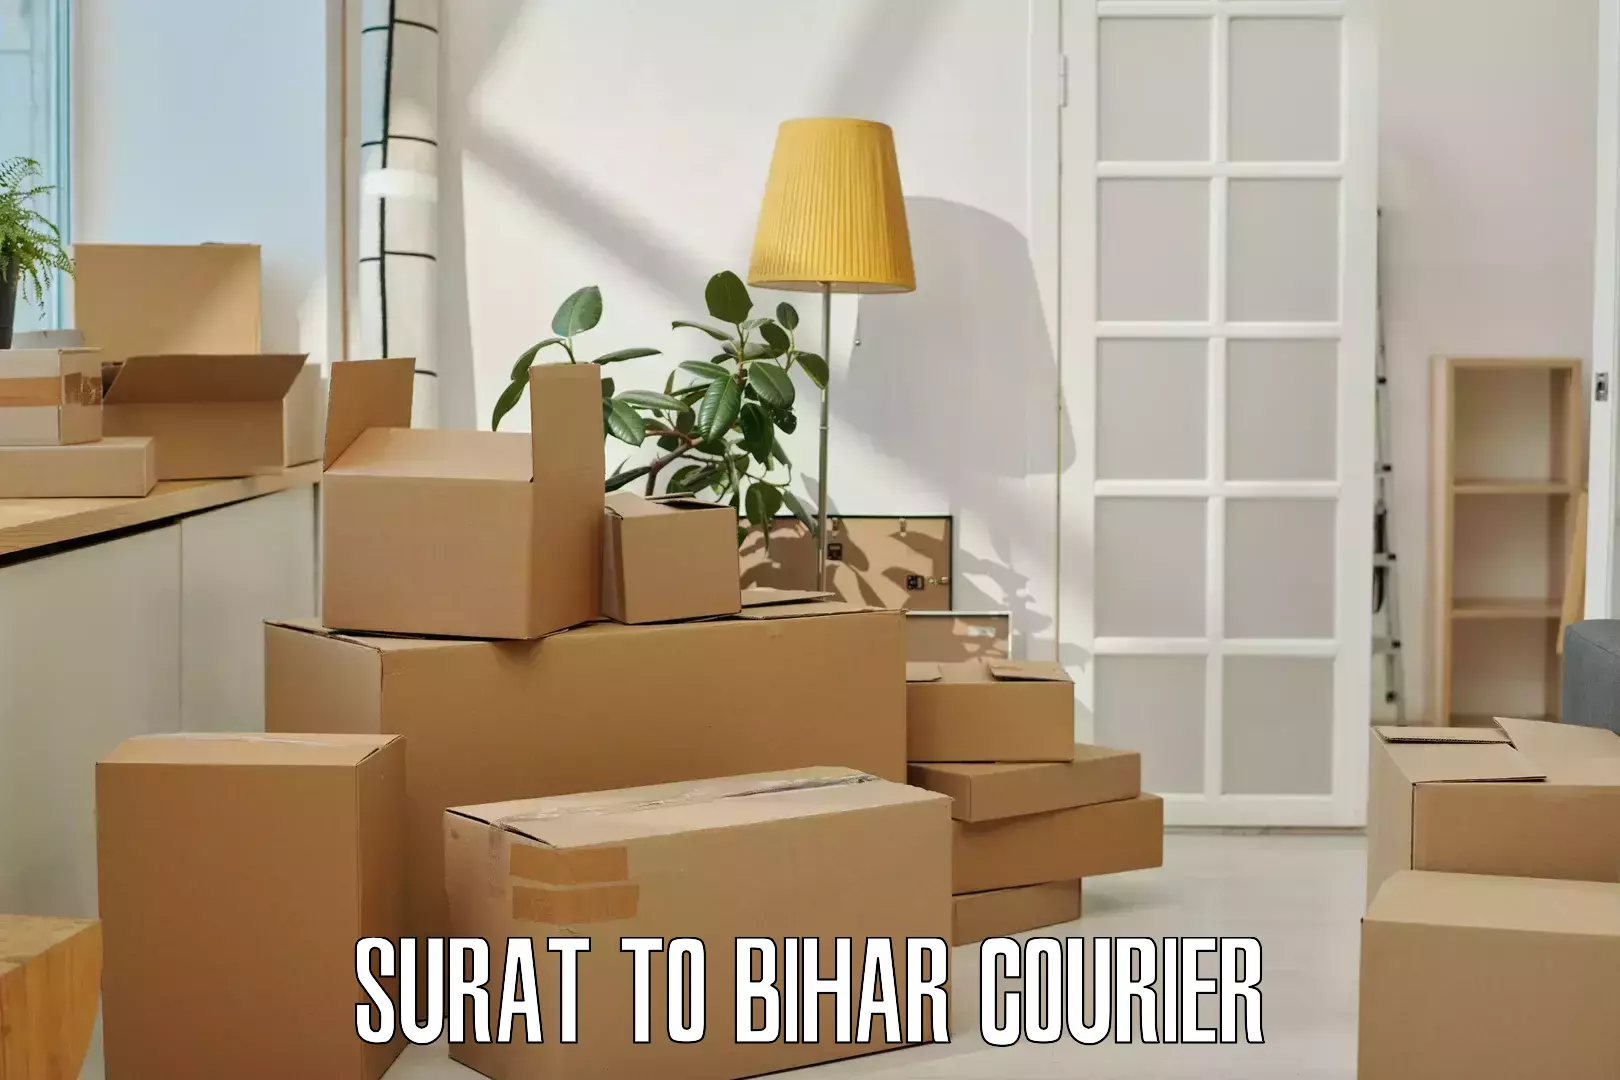 State-of-the-art courier technology Surat to Bihar